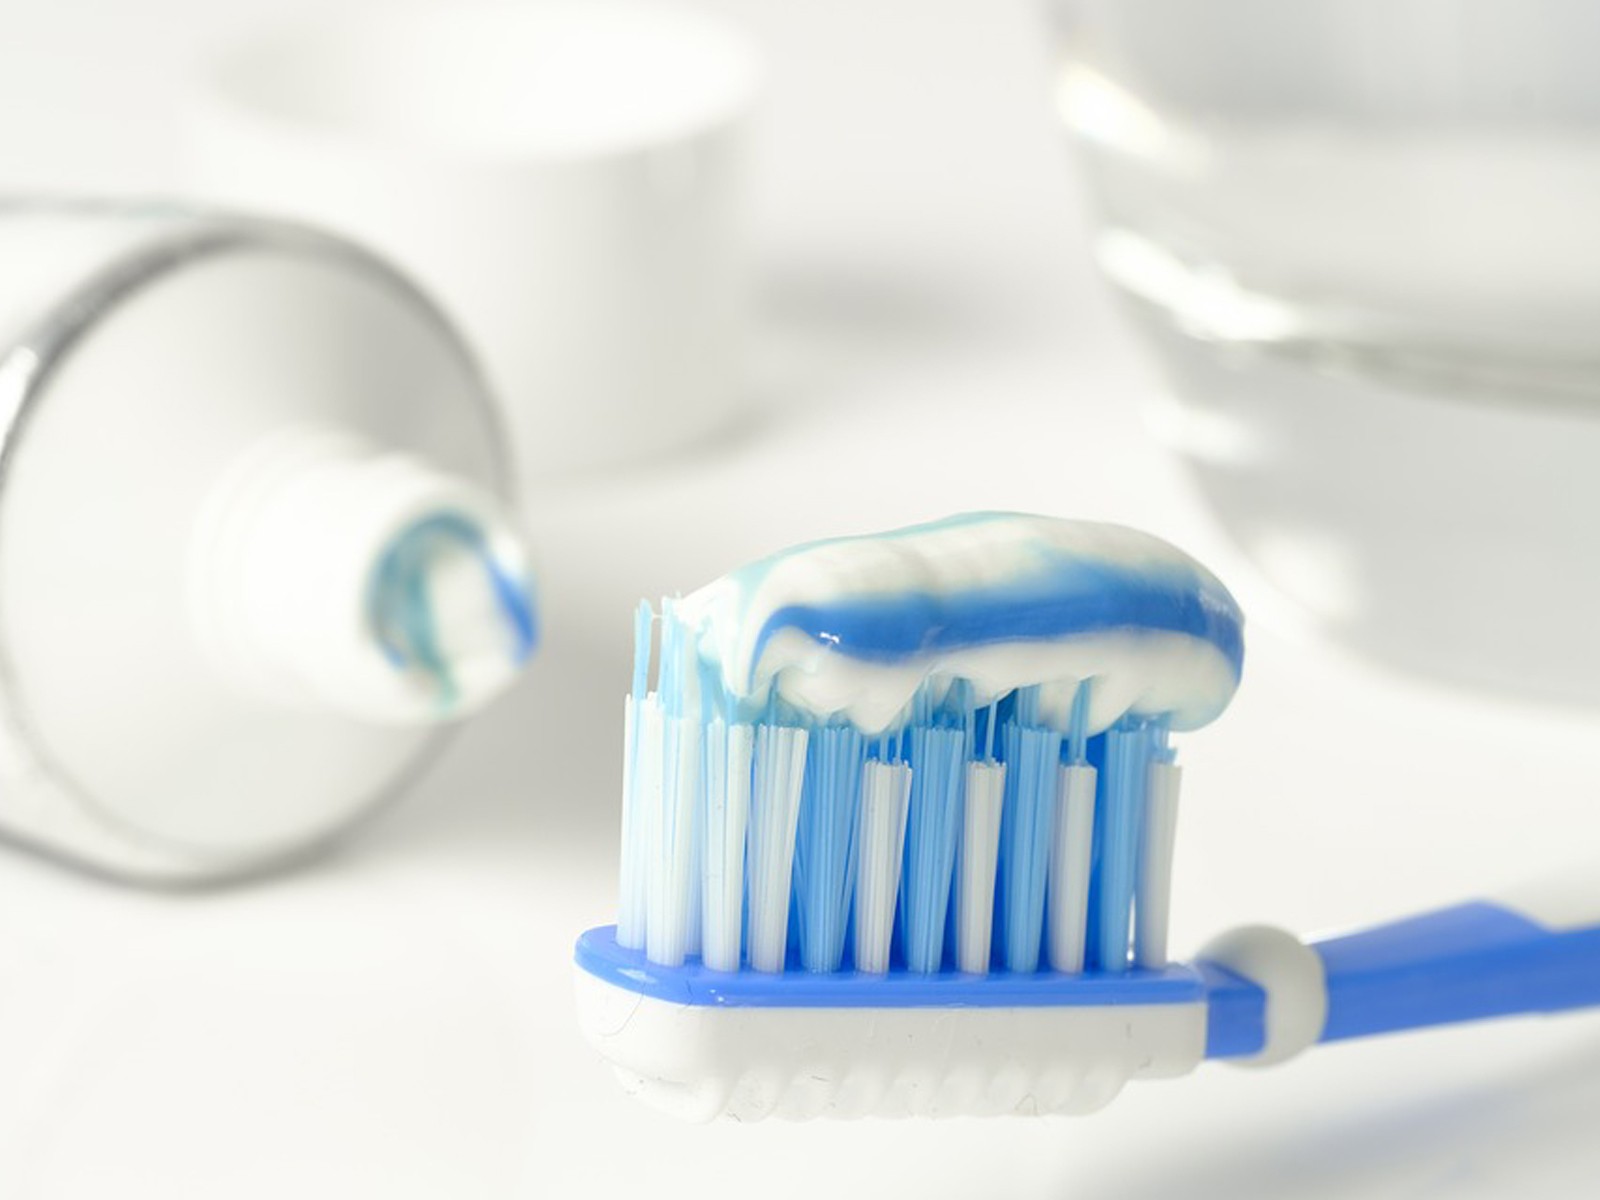 Can Xylitol Toothpaste Improve Your Dental Health